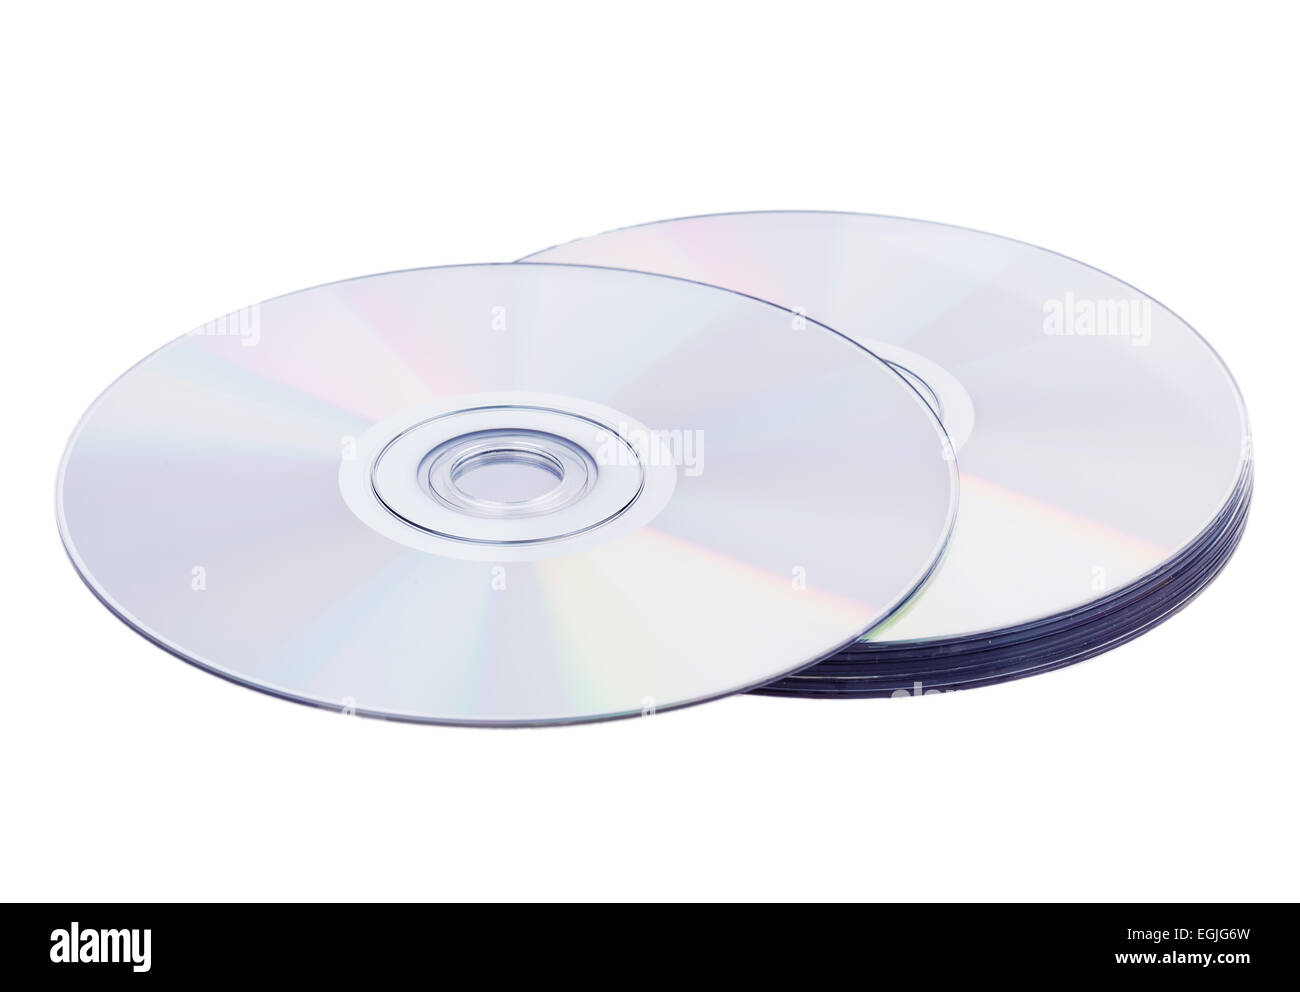 compact discs on a white background Stock Photo